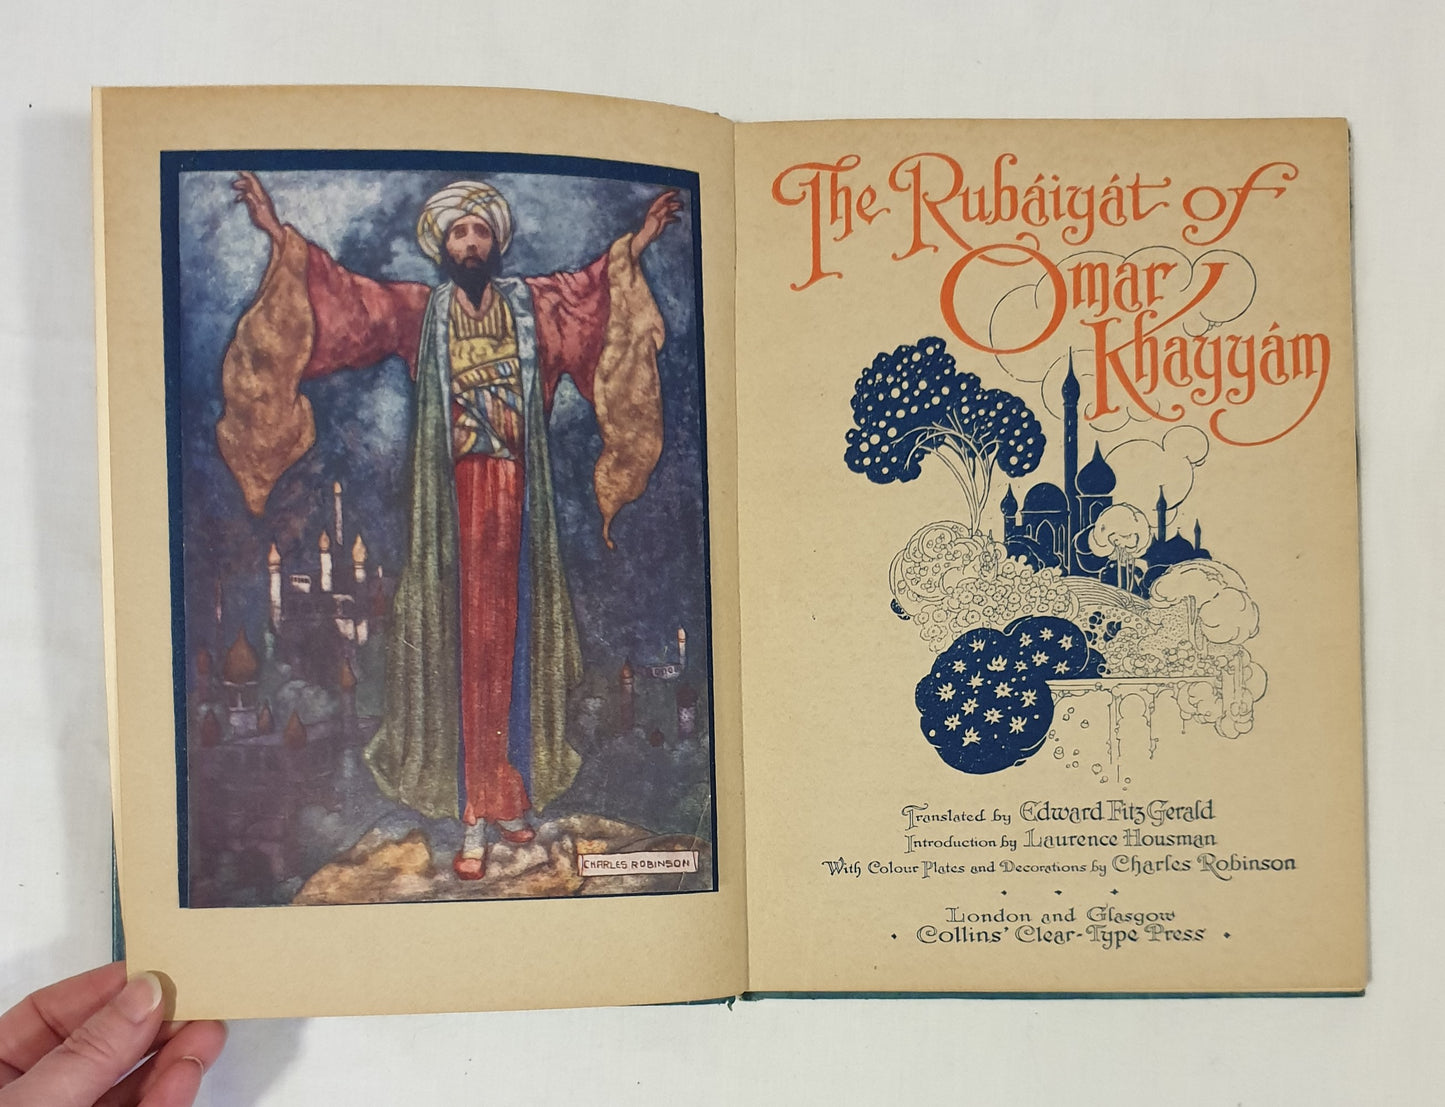 The Rubaiyat of Omar Khayyam  by Edward Fitzgerald  with colour plates and decorations by Charles Robinson